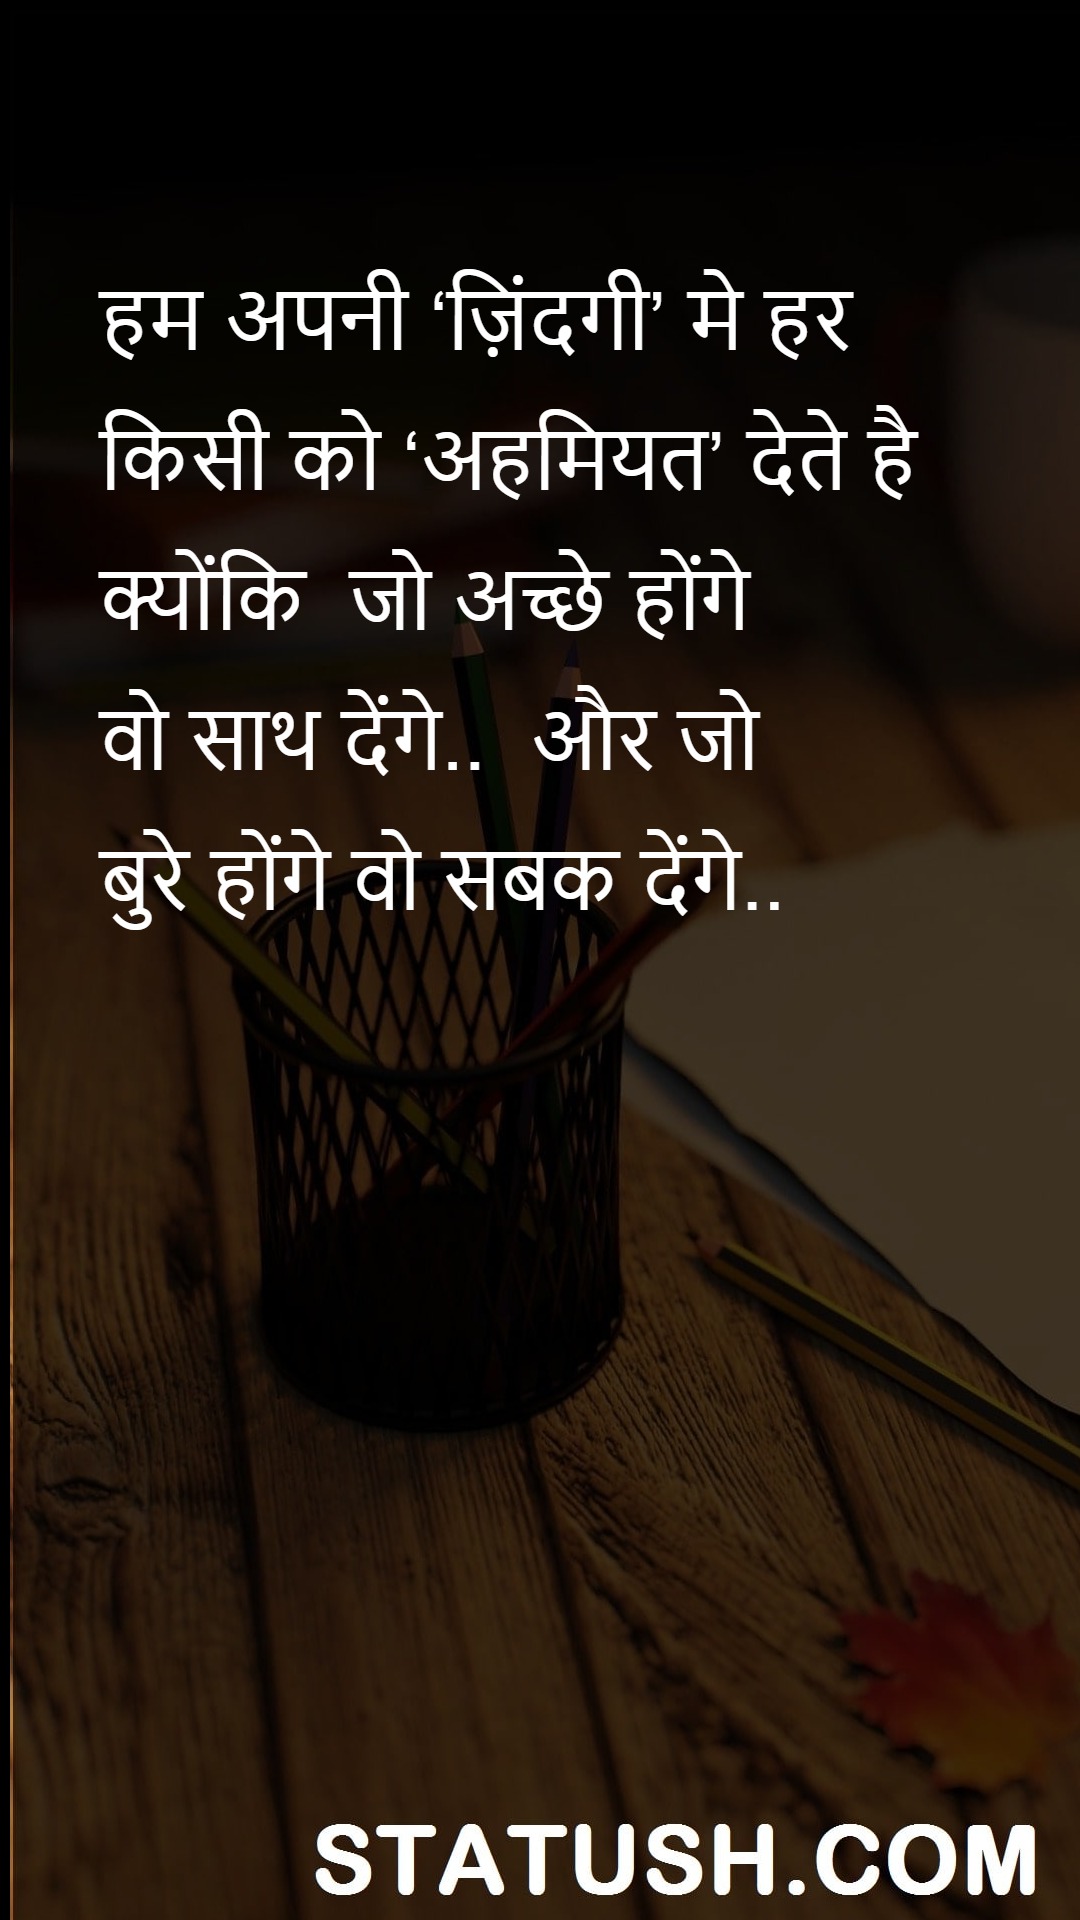 We give importance to everyone in our life Hindi Quotes at statush.com